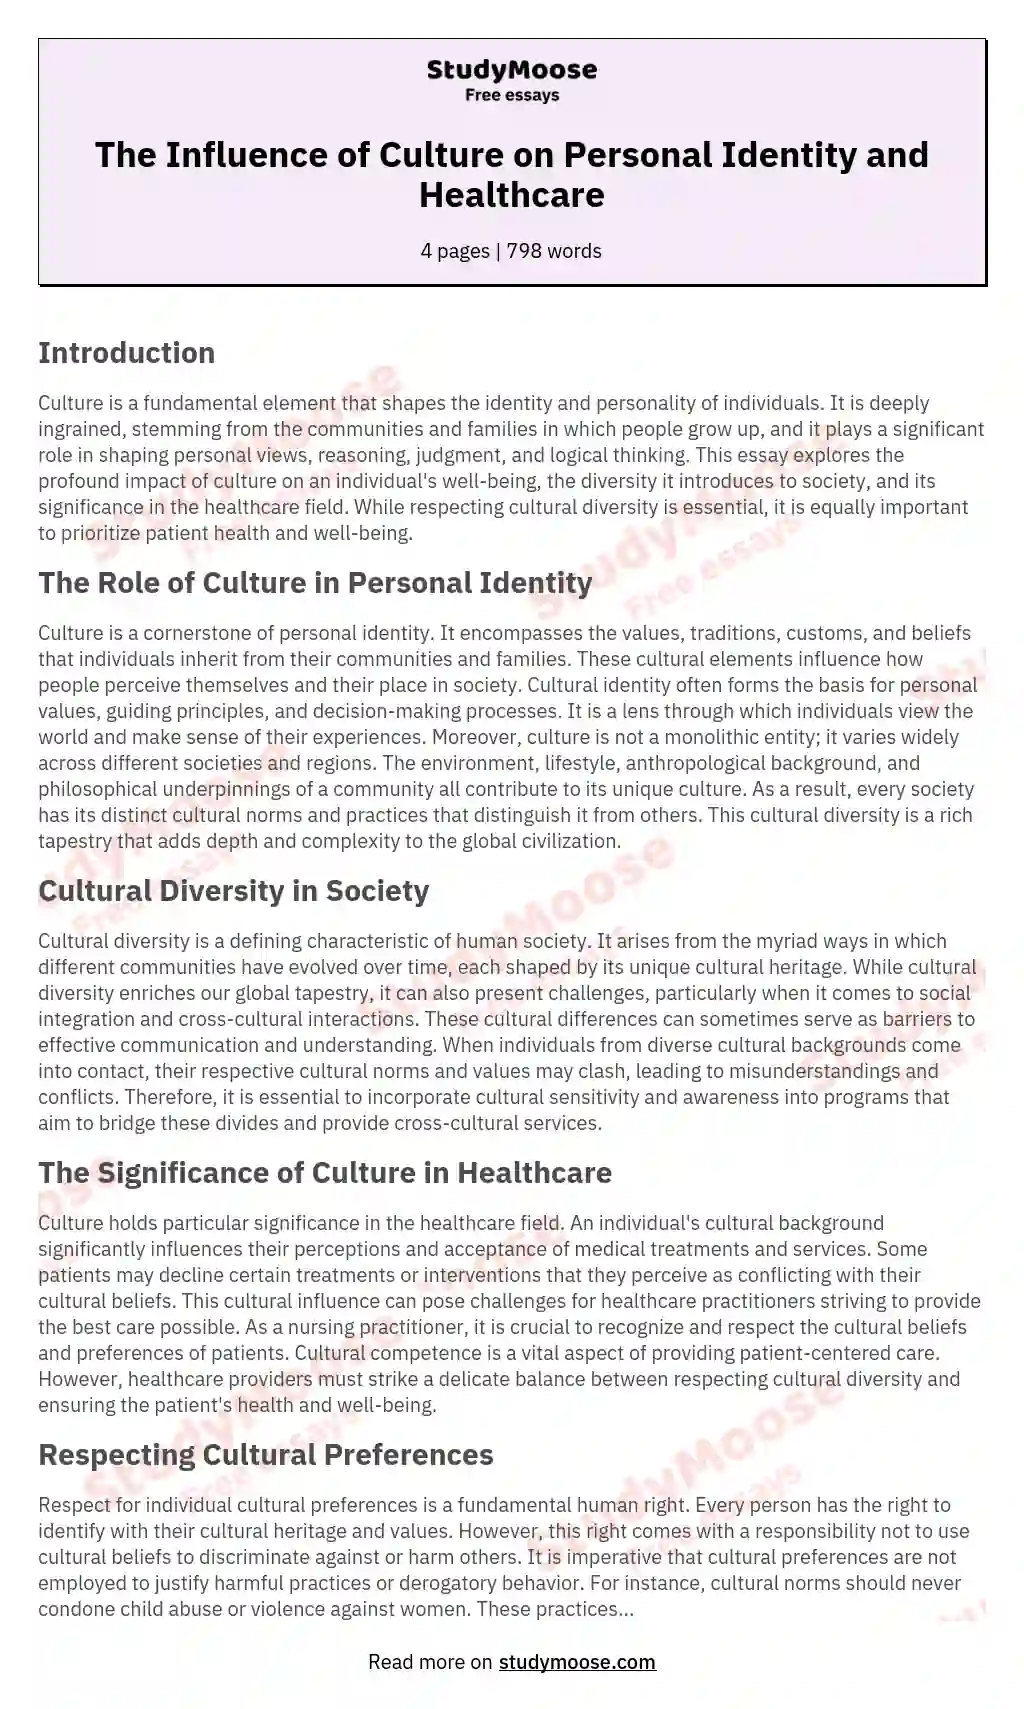 The Influence of Culture on Personal Identity and Healthcare essay